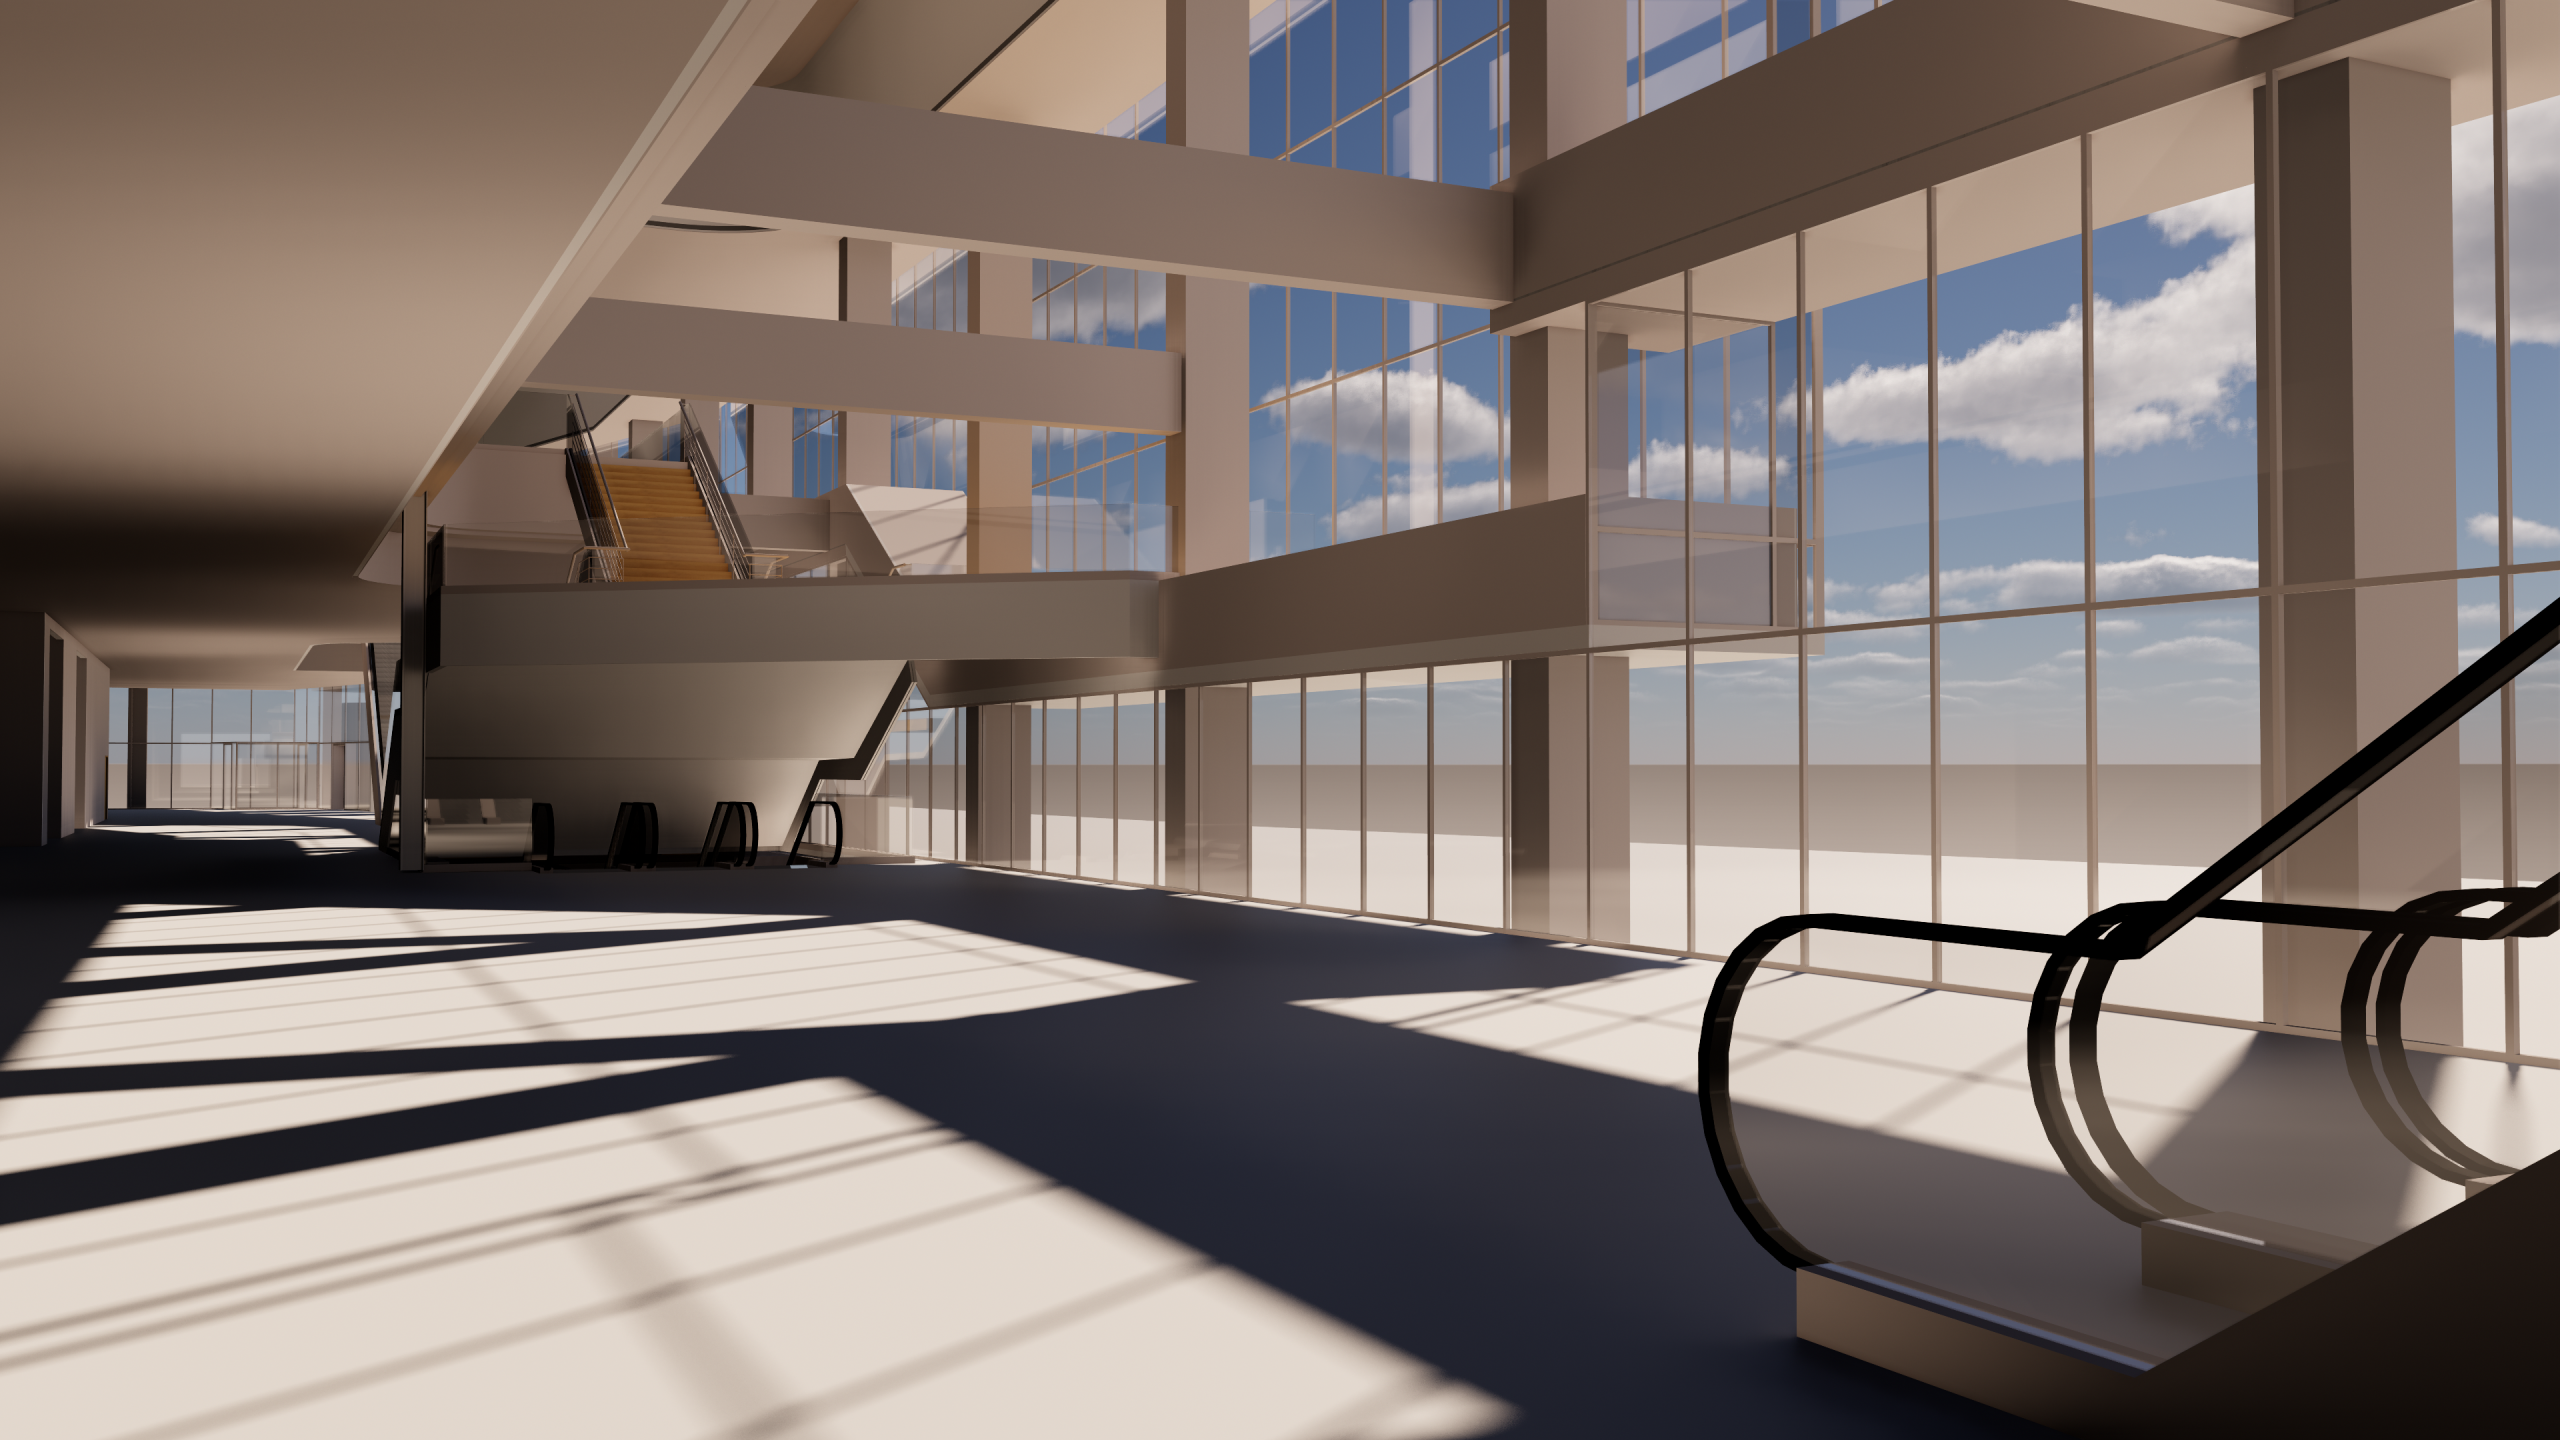 Render in real-time with the Enscape and BricsCAD integration. Image credit: HOK